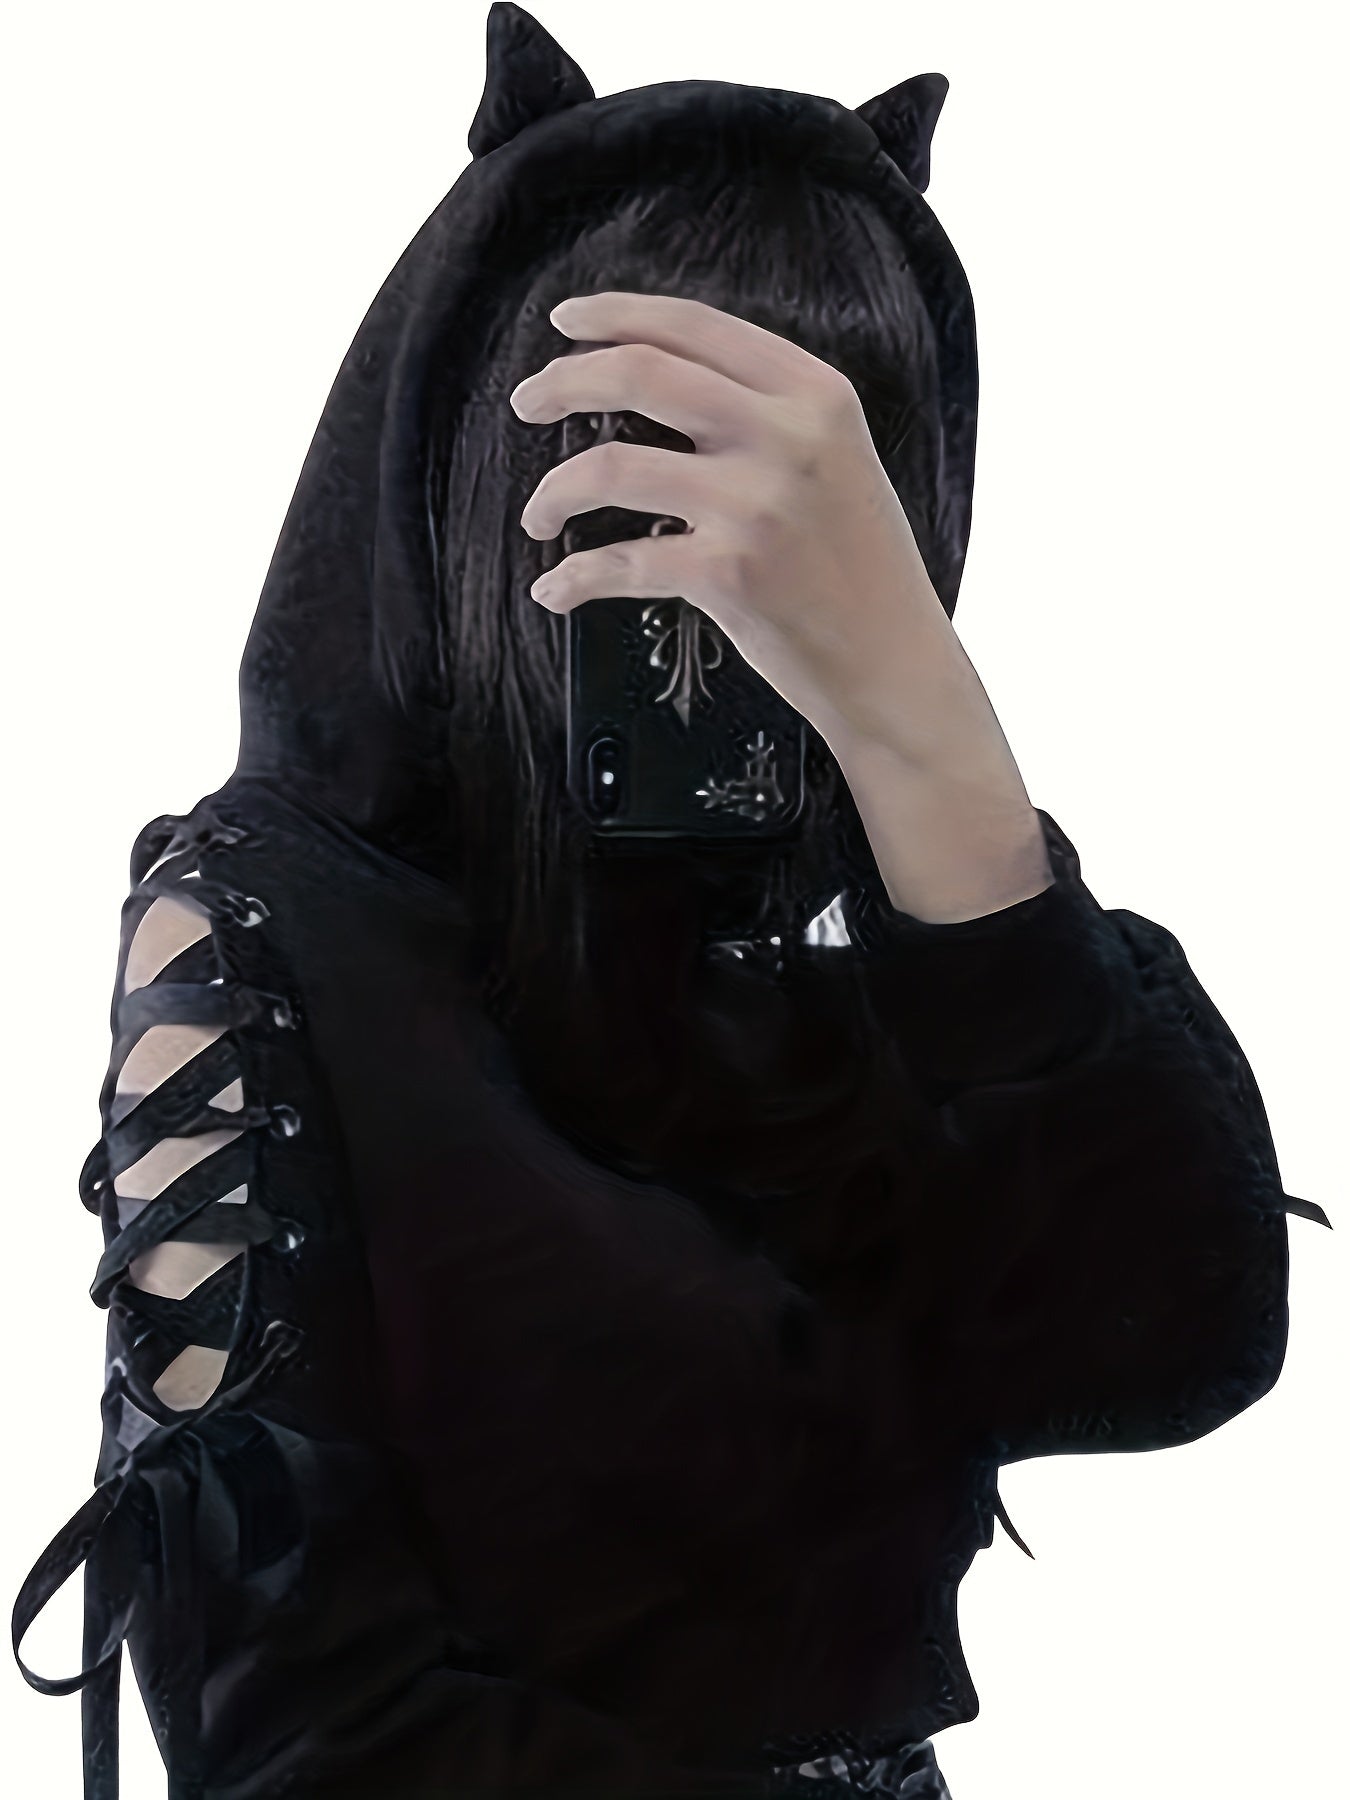 Person in a black Maramalive™ Halloween Gothic Cat Ear Hoodie, Cosplay Crop Sweatshirt, taking a selfie that hides their face behind a phone. The Polyester hoodie has unique lace-up detailing on the sleeves and embodies the Y2K style with its playful design.